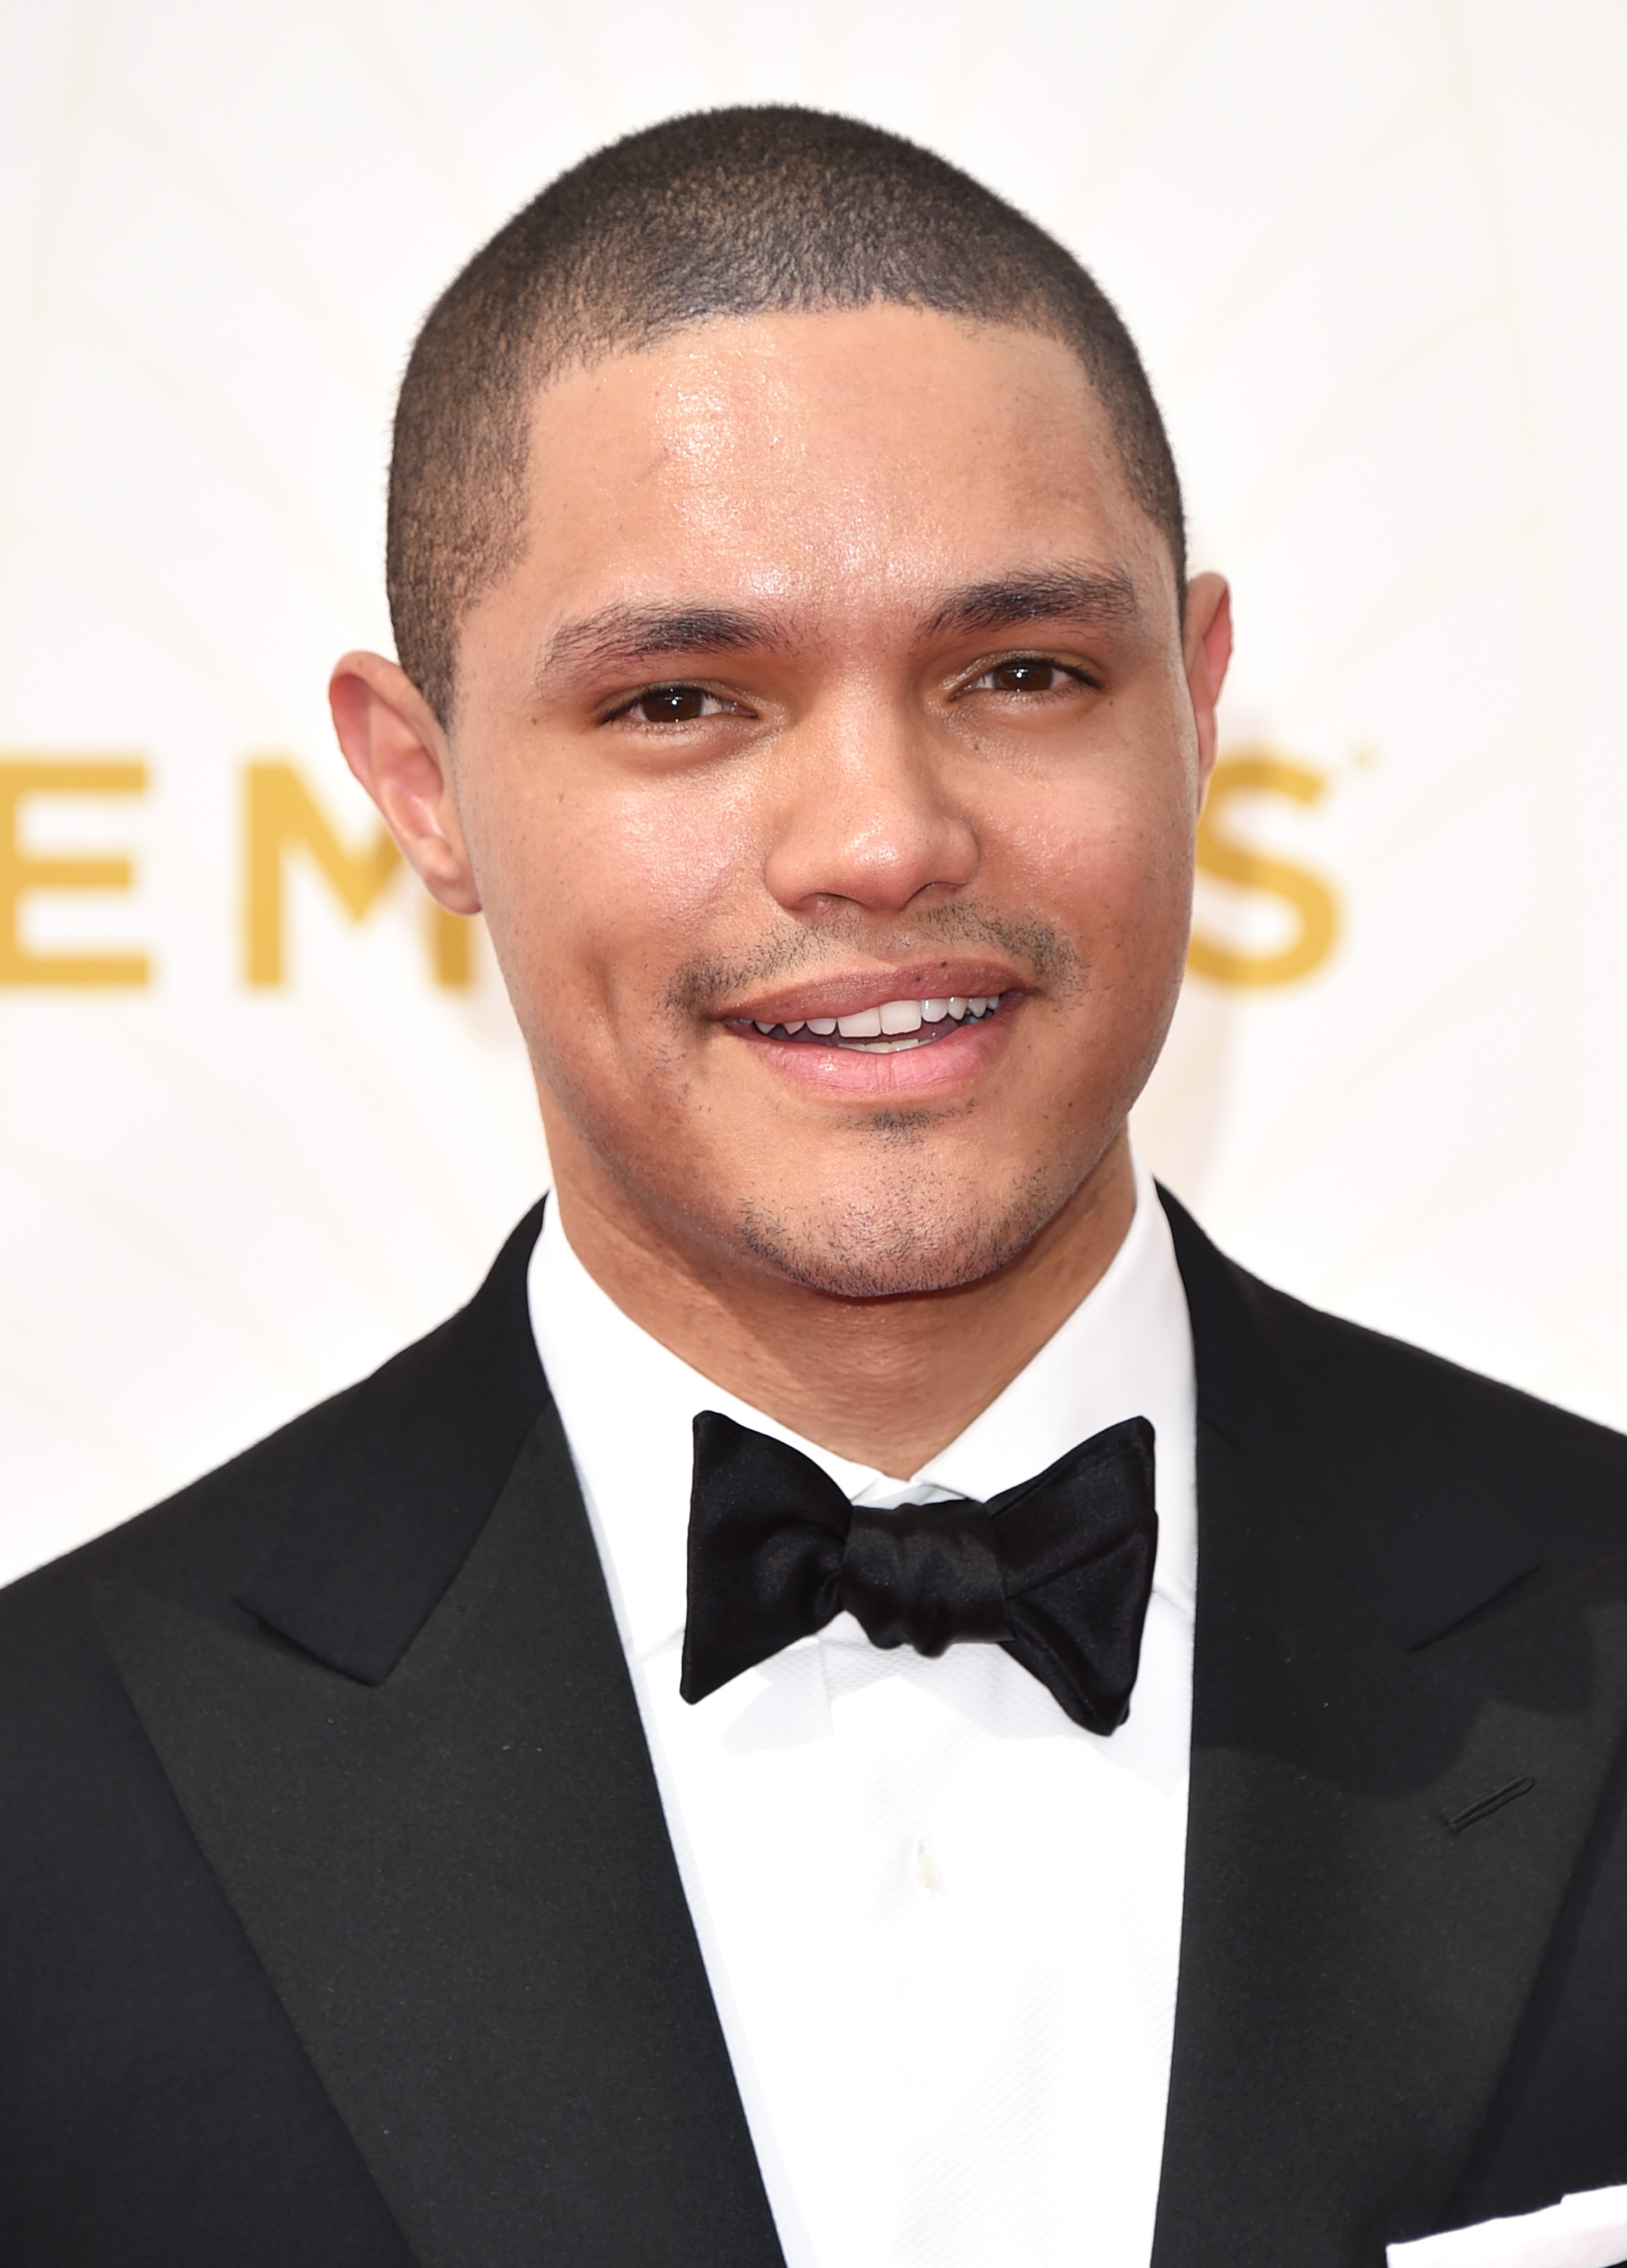 Trevor Noah at the 67th Annual Primetime Emmy Awards in Los Angeles on Sept. 20, 2015.